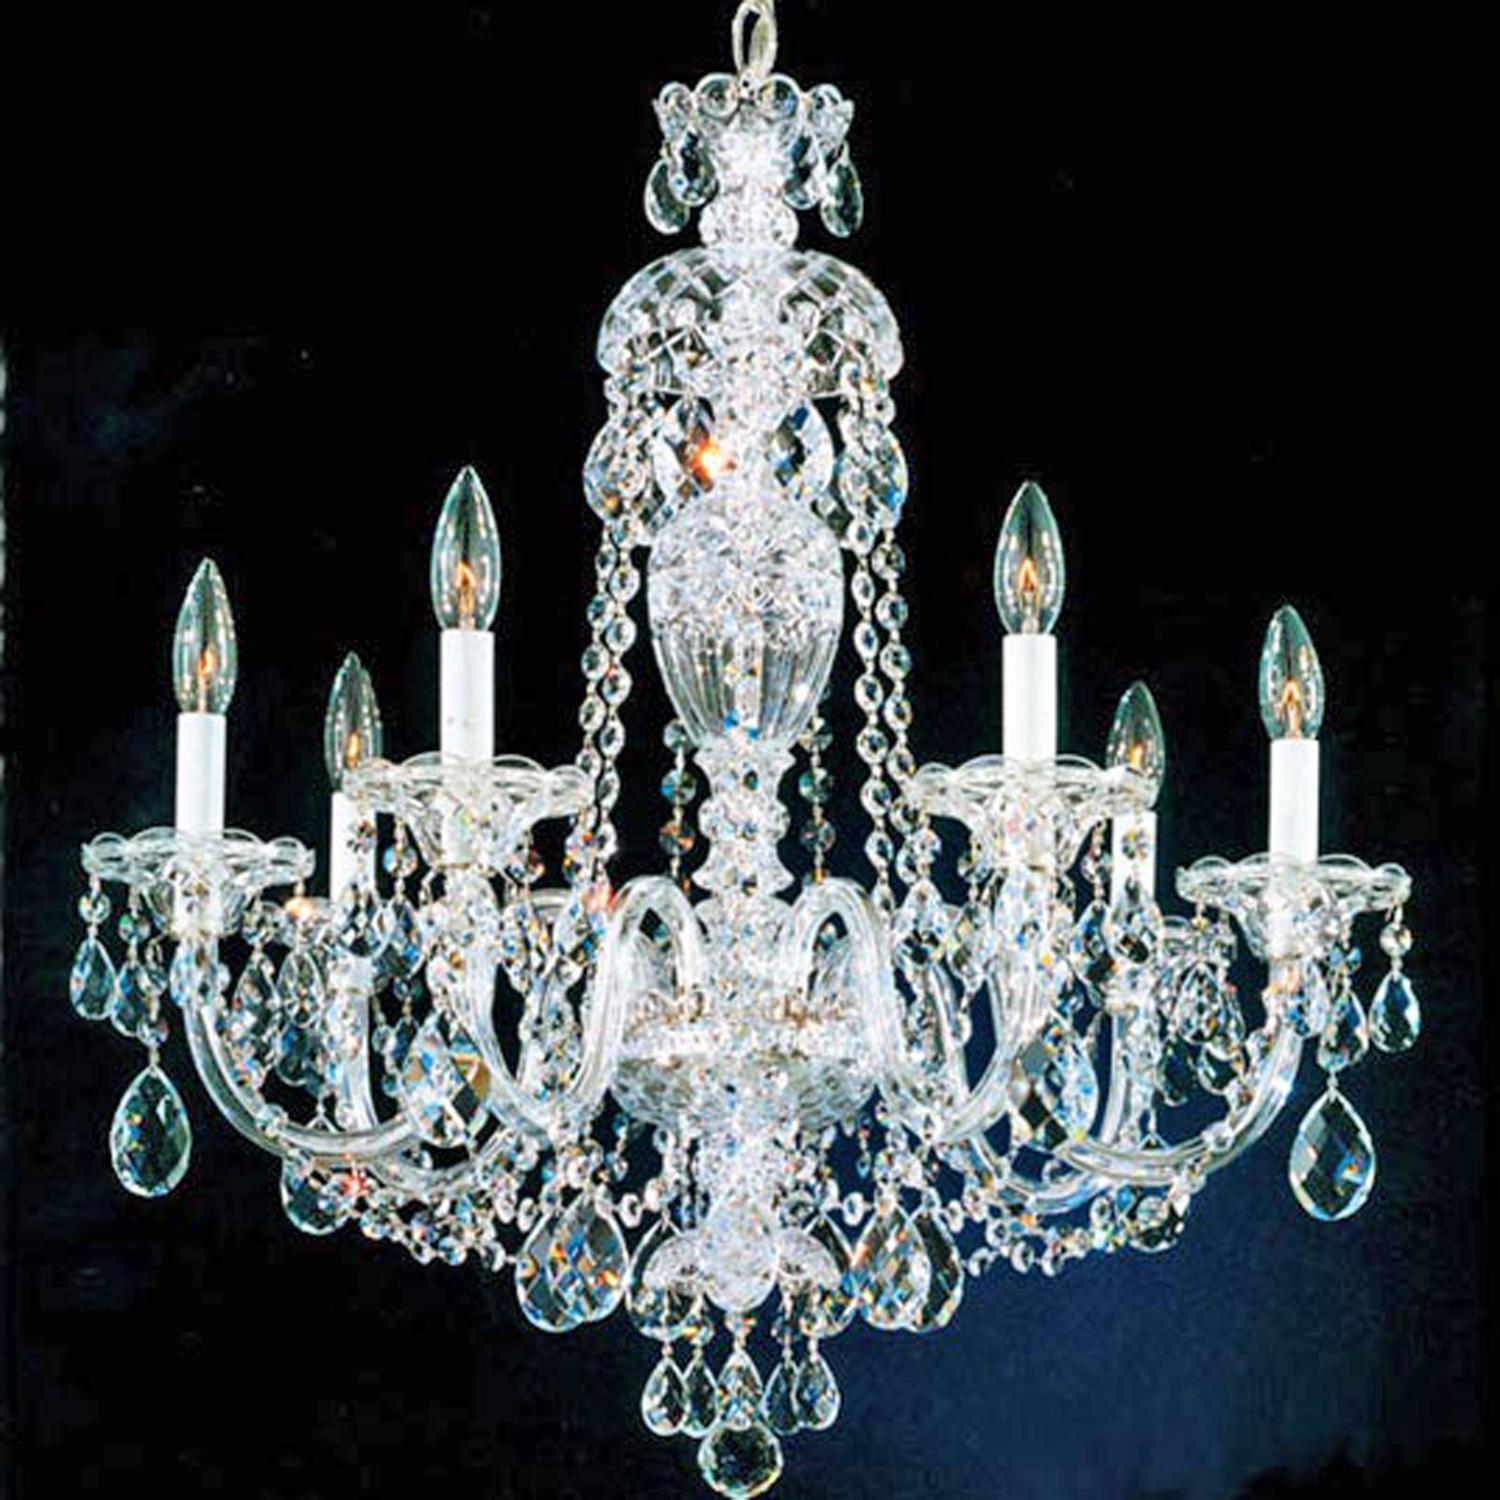 Hi, I'm the Chandelier editor for http://t.co/gMQg5P8g70. I follow all news regarding chandelier fashion. Follow me and our main account @DestinationLux